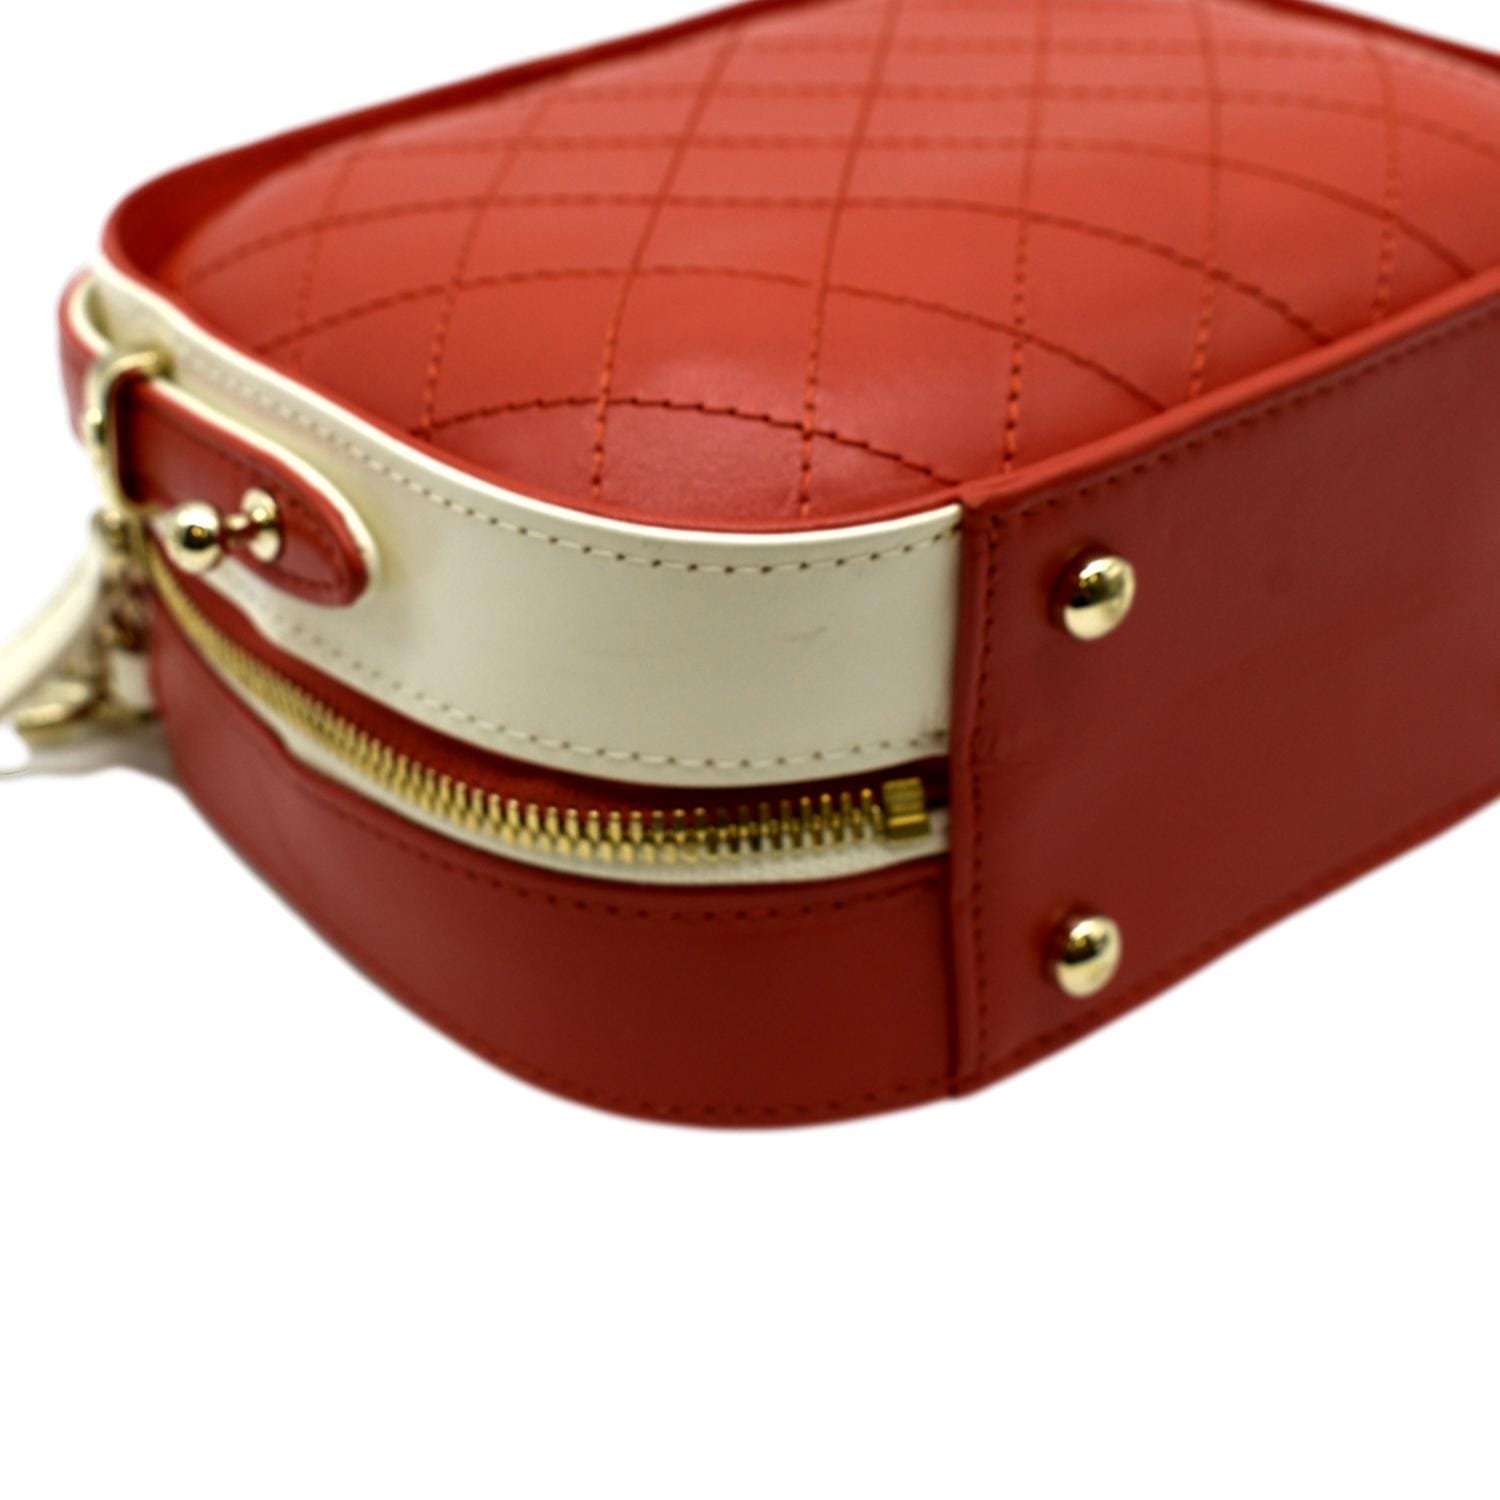 Chanel Crumpled Calfskin Leather Vanity Case Crossbody Bag Red